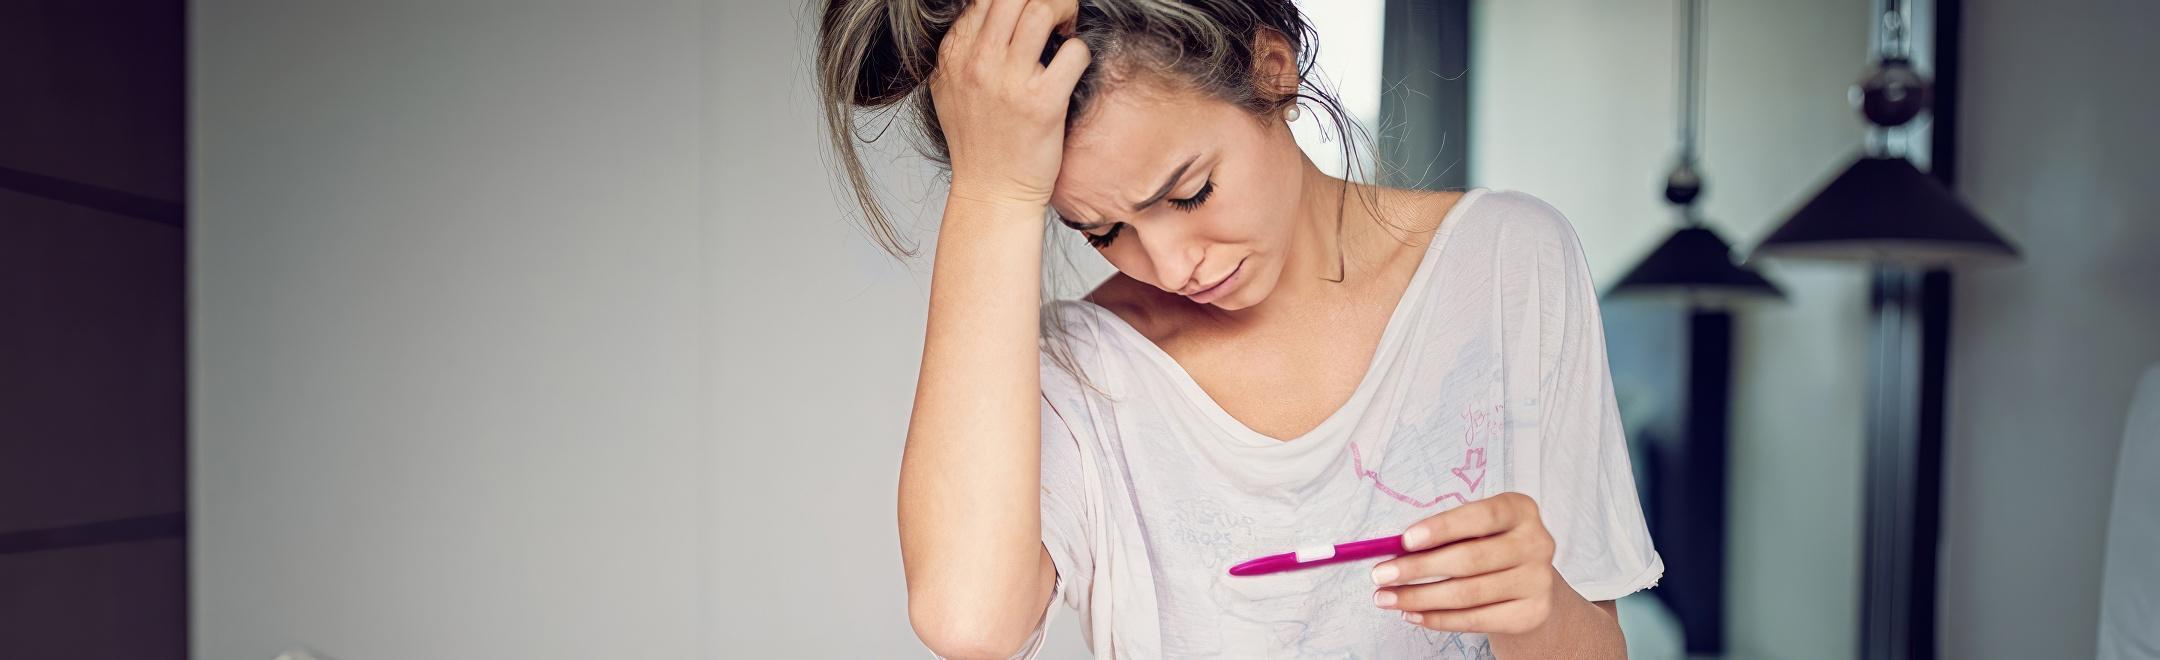 Teen pregnancy. Teen stressed about a pregnancy test. What if You Find Out You’re Pregnant?